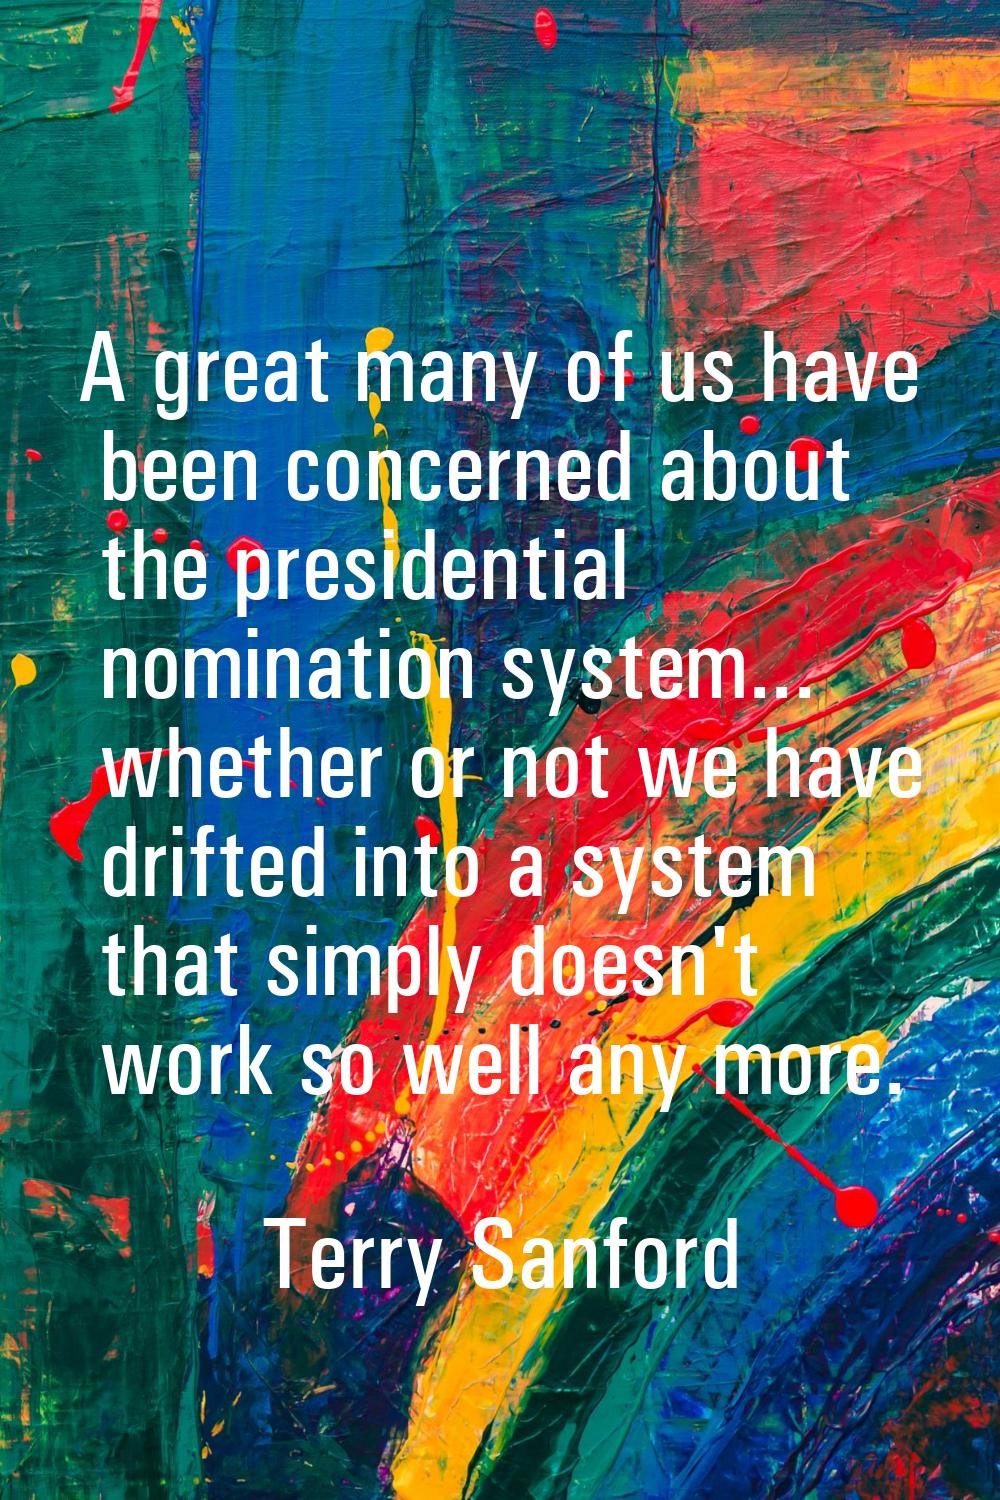 A great many of us have been concerned about the presidential nomination system... whether or not w